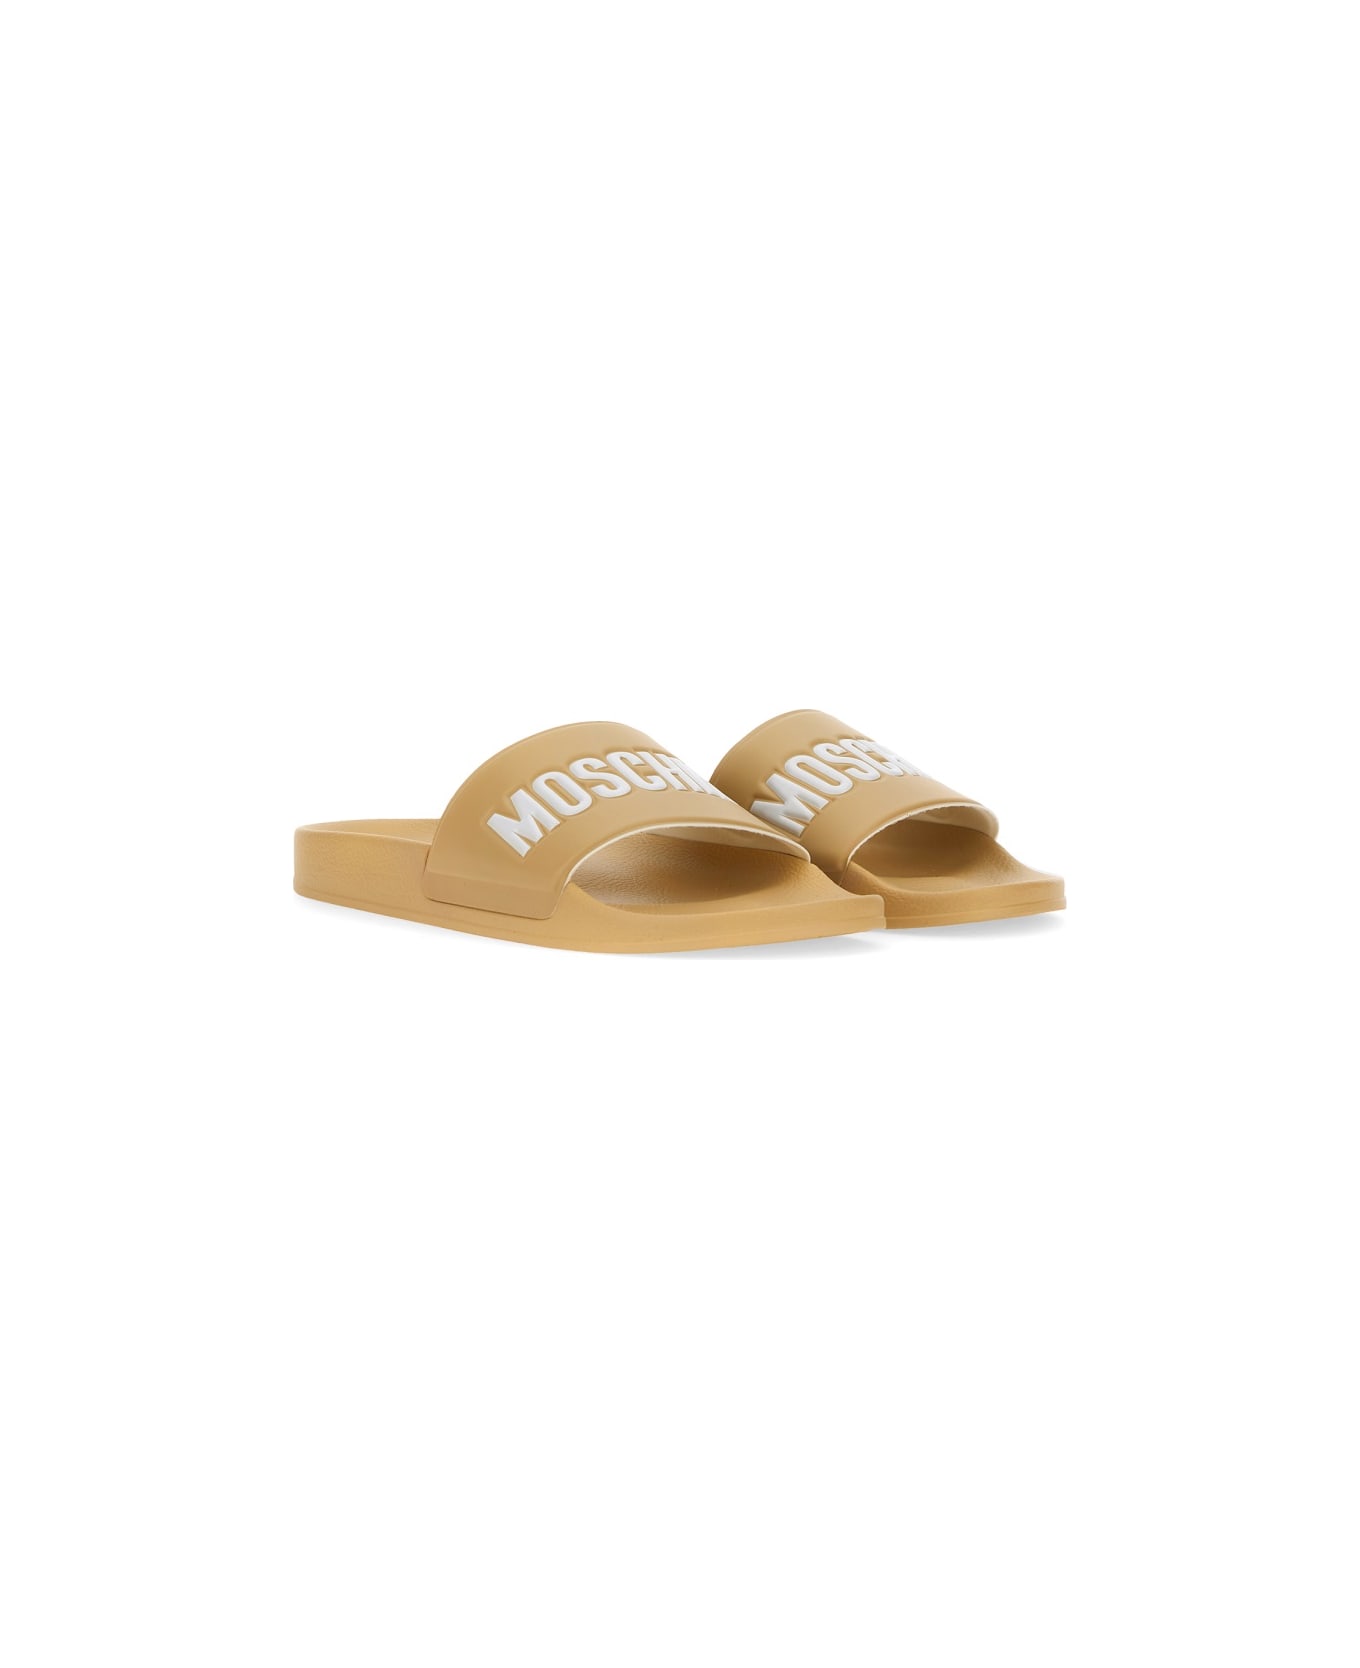 Moschino Sandal With Logo - BEIGE その他各種シューズ